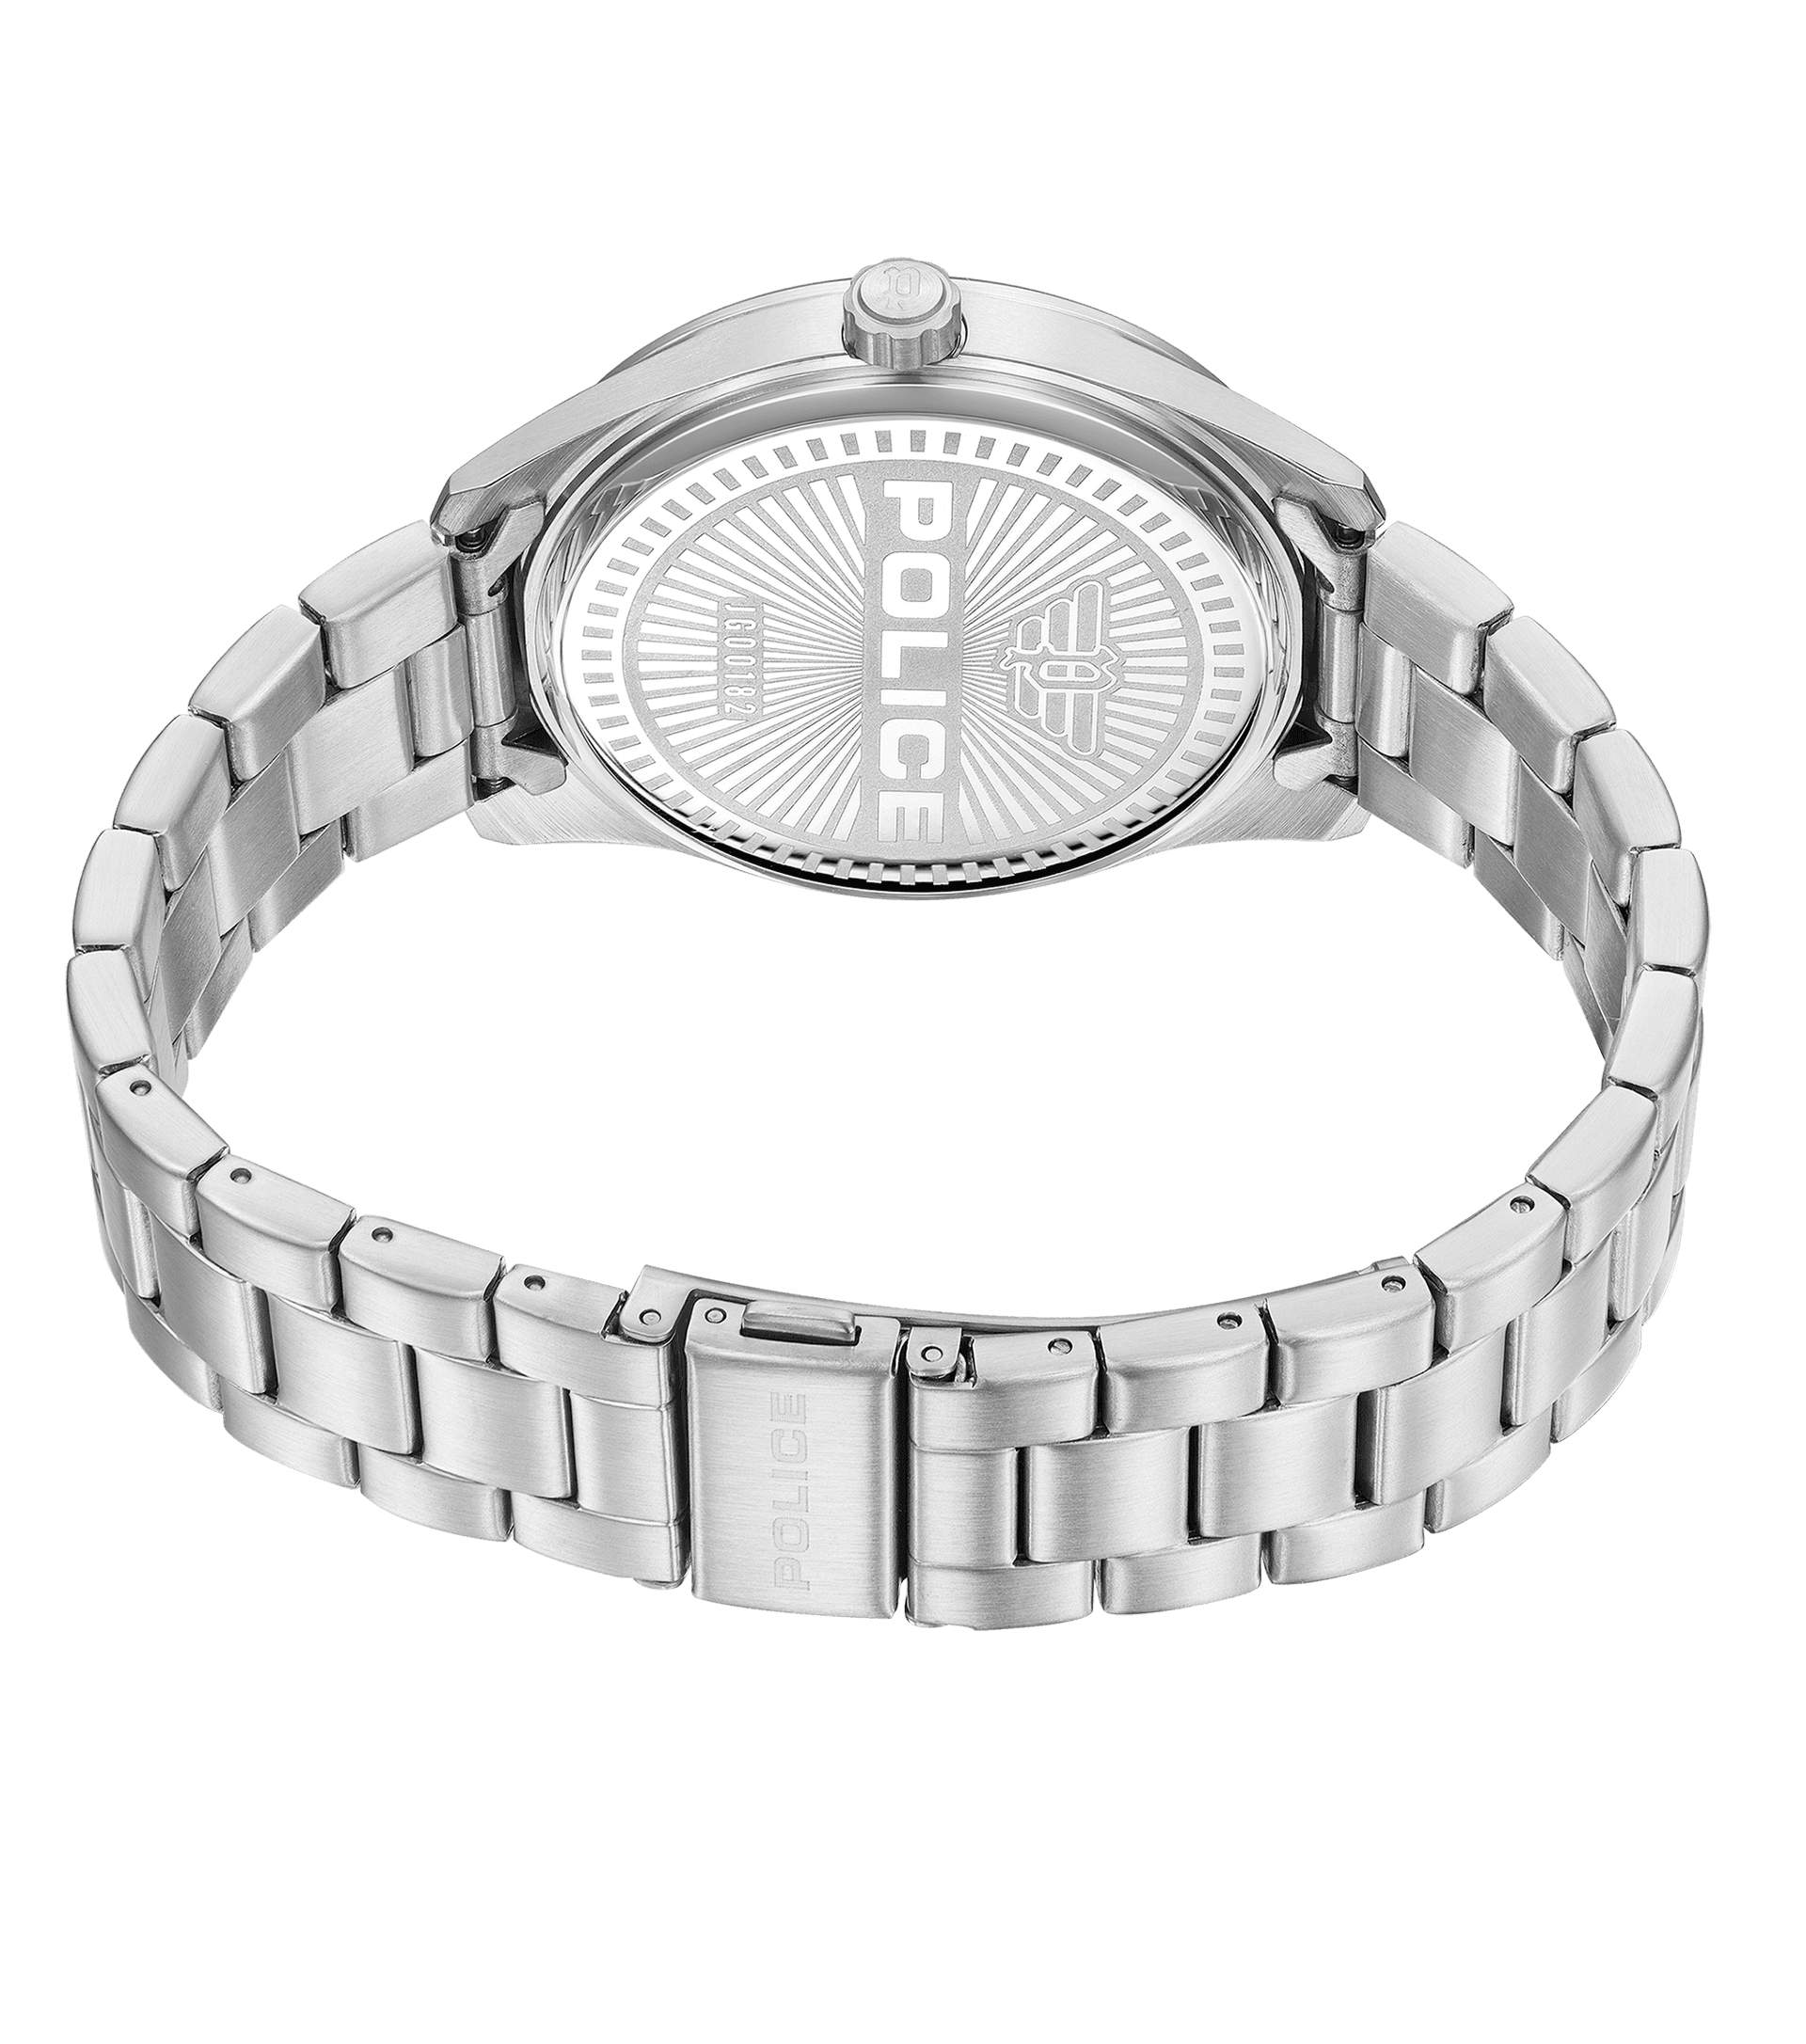 Police watches - Grille Watch By Police For Men Silver, Blue